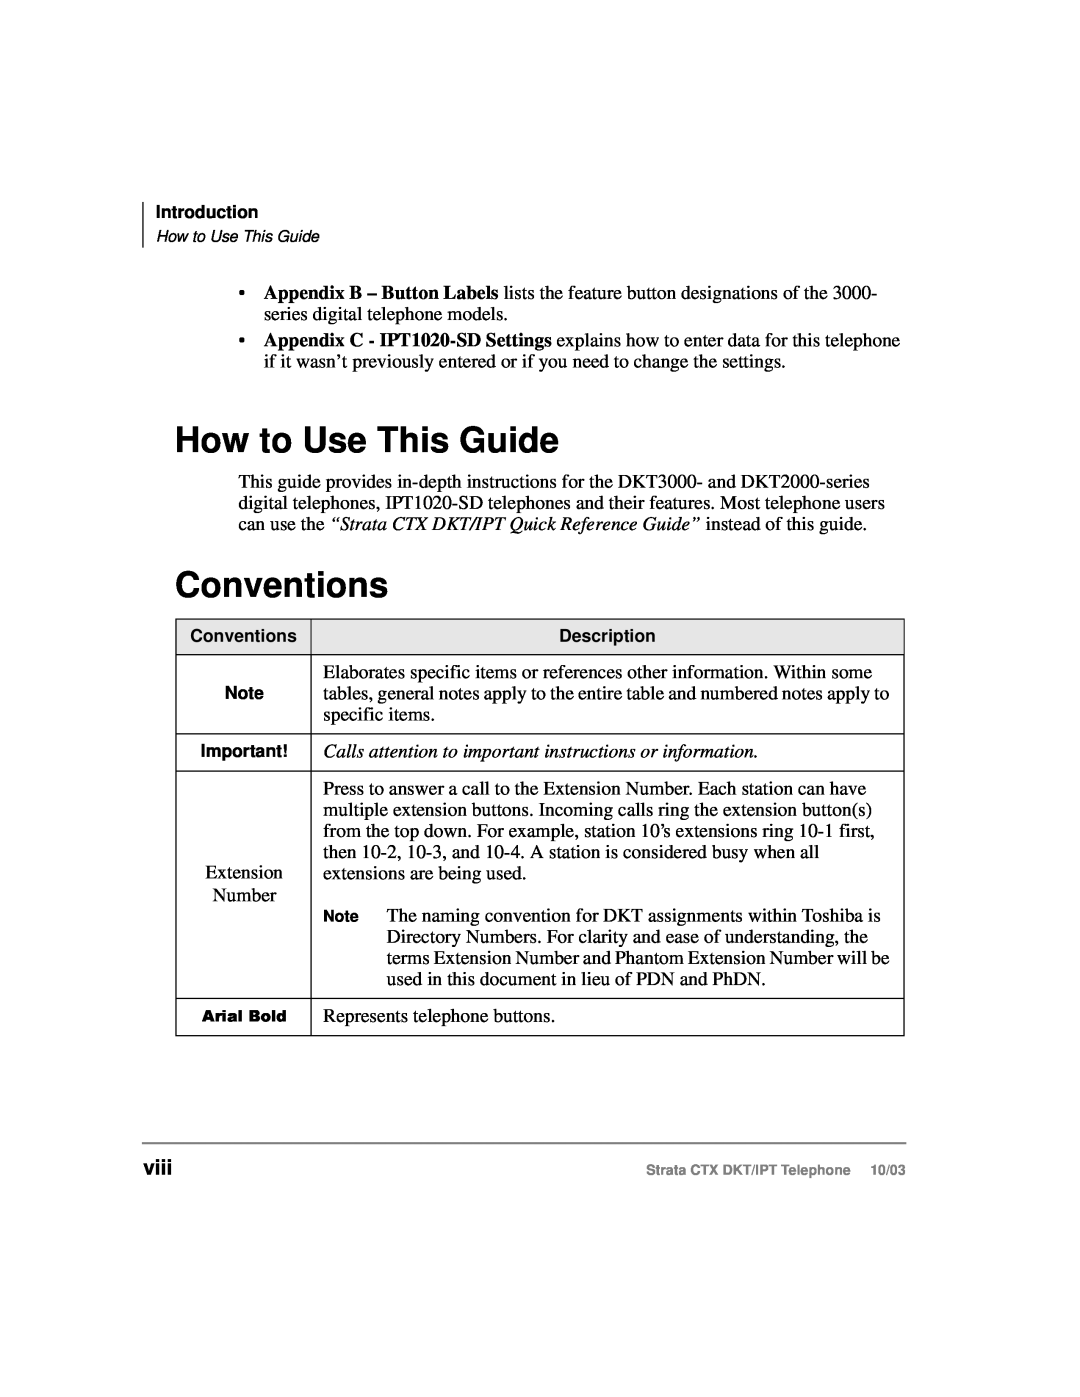 Toshiba IPT, DKT manual How to Use This Guide, Conventions, viii, Calls attention to important instructions or information 